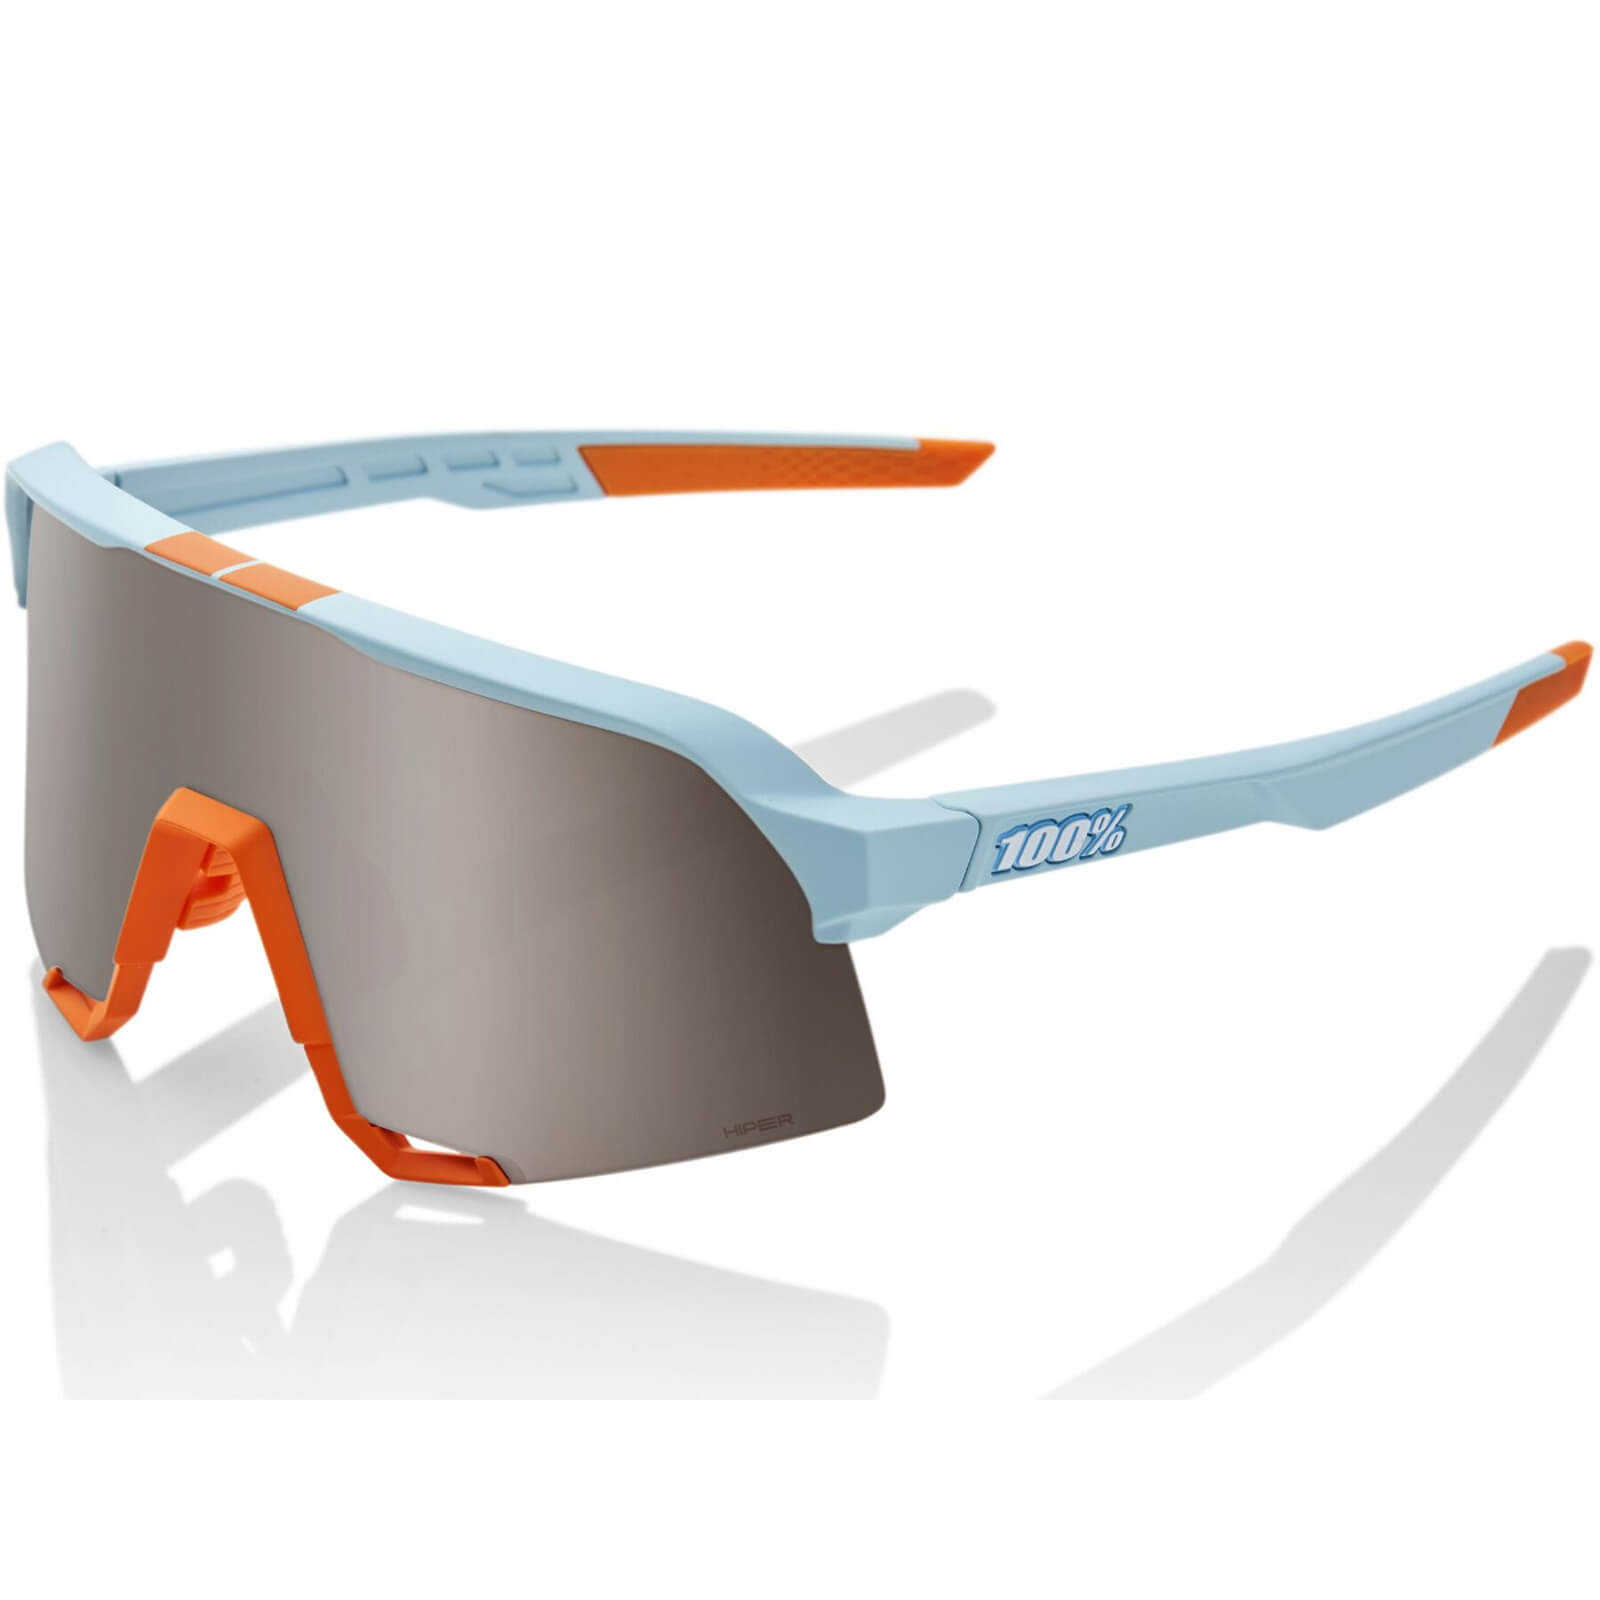 Image of 100% S3 Sunglasses with HiPER Silver Mirror Lens - Soft Tact Two Tone